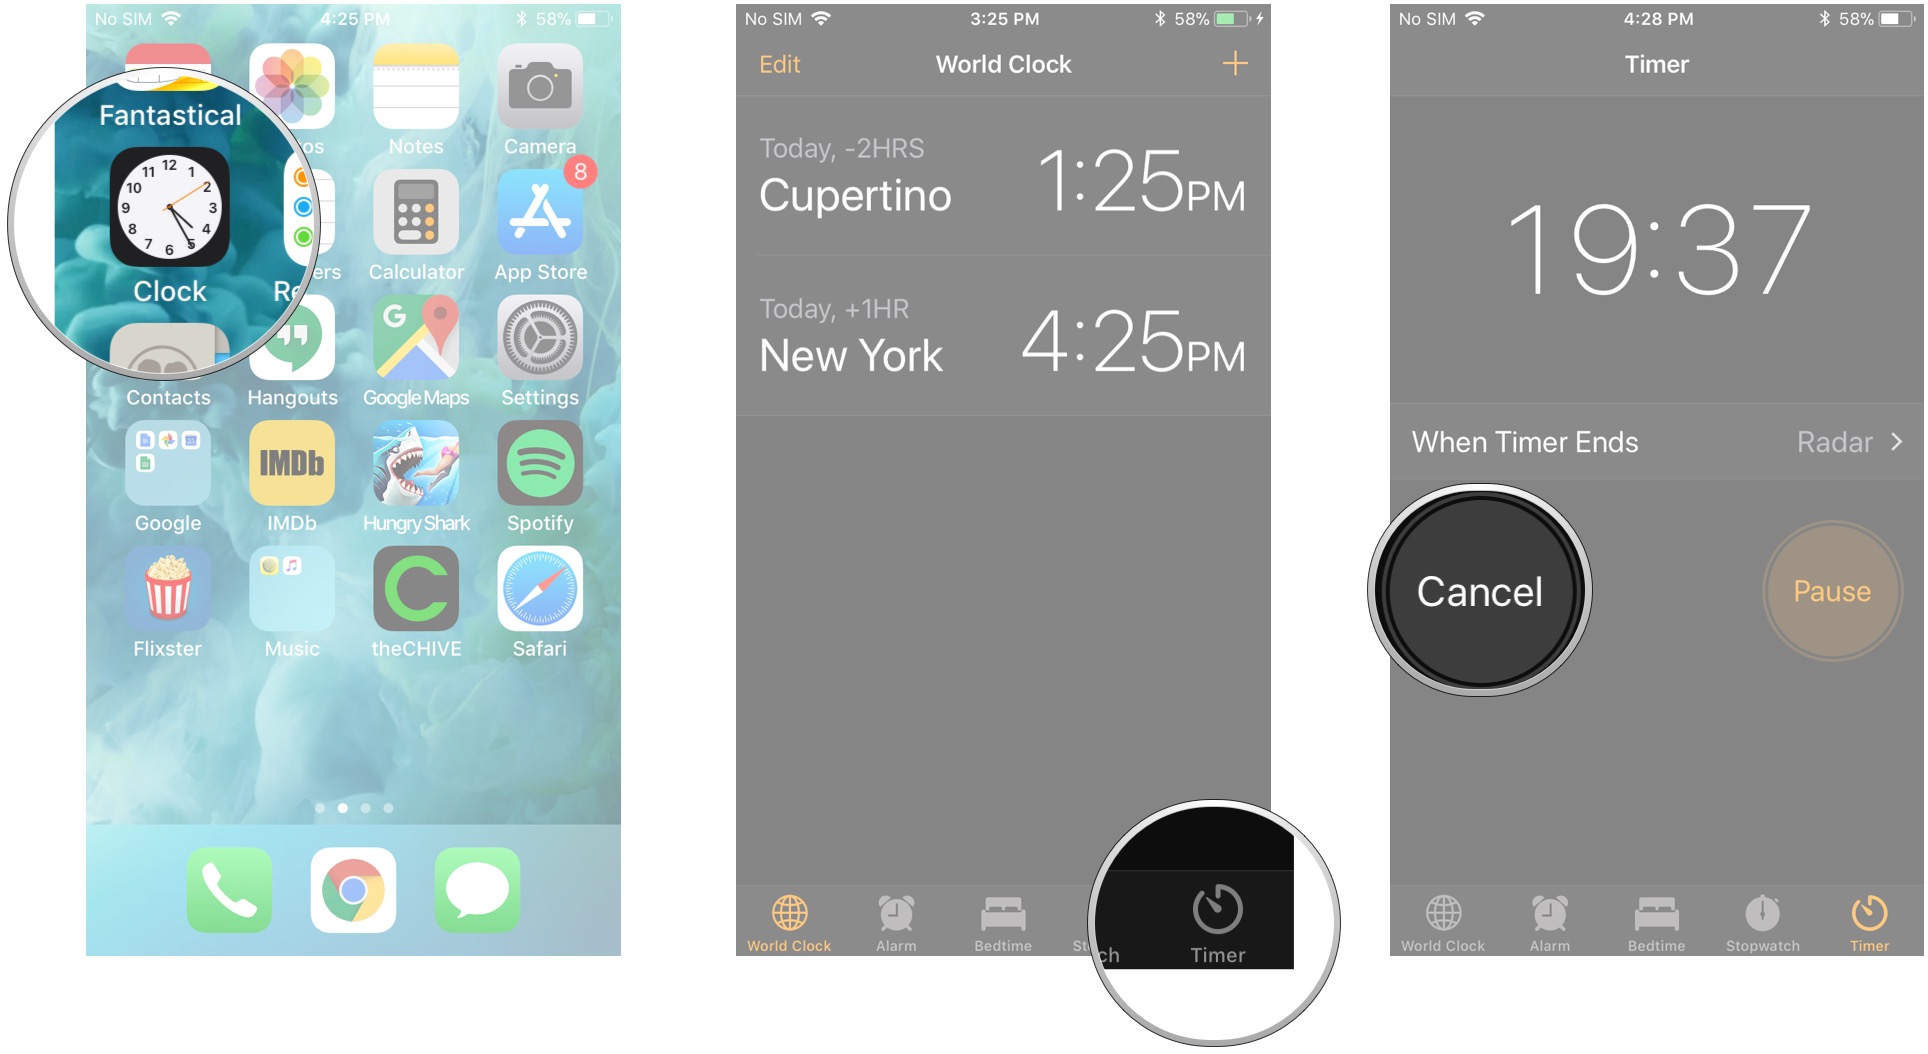 How to clear a timer in iOS 15: Launch the Clock app, tap the Timer tab, tap Cancel